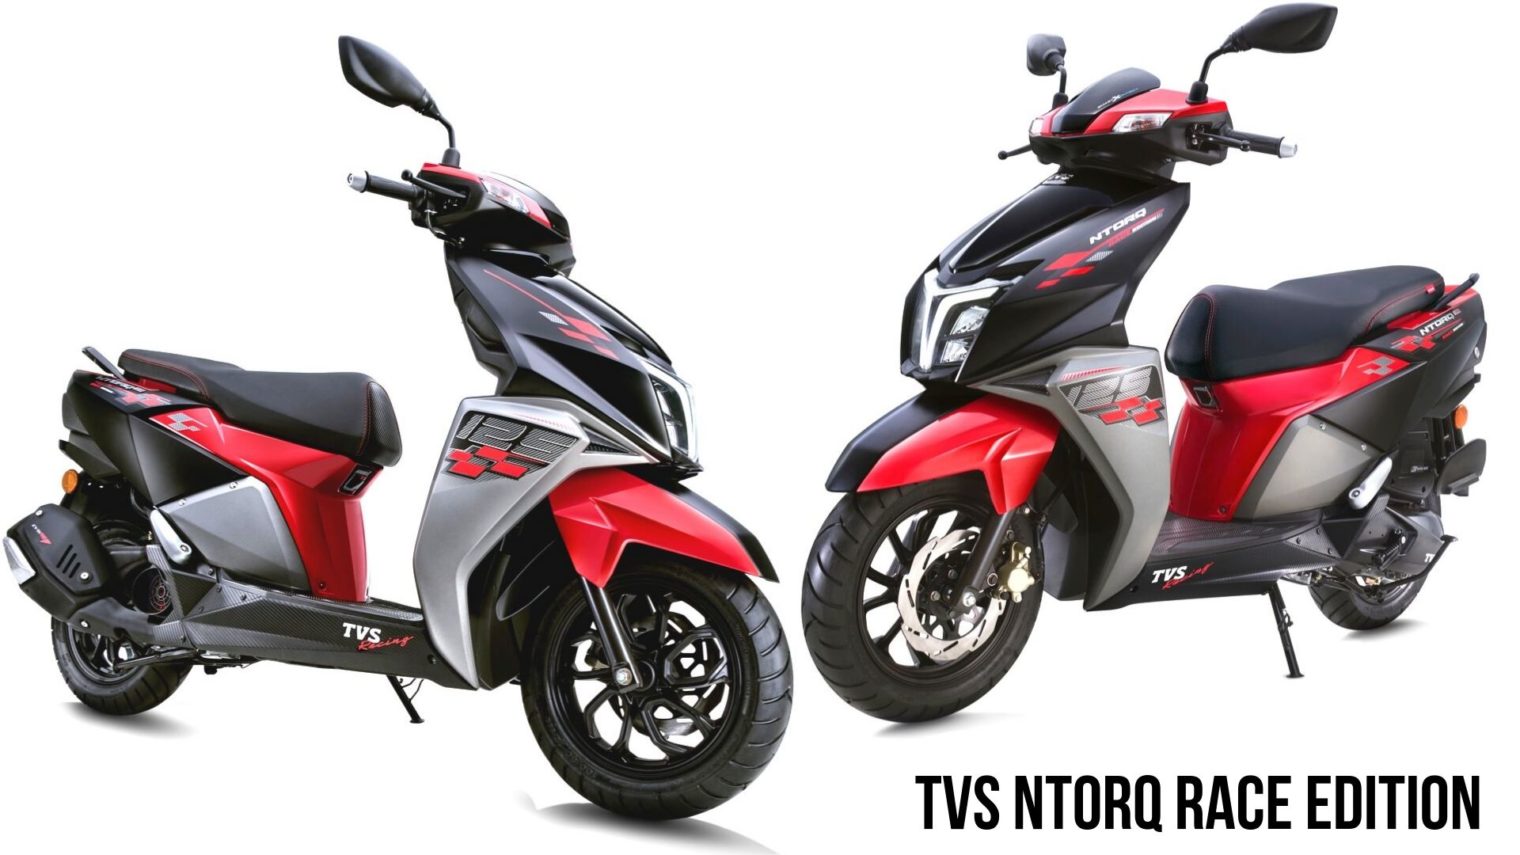 Top 5 Bs6 125cc Scooters In India Tvs Ntorq To Suzuki Access